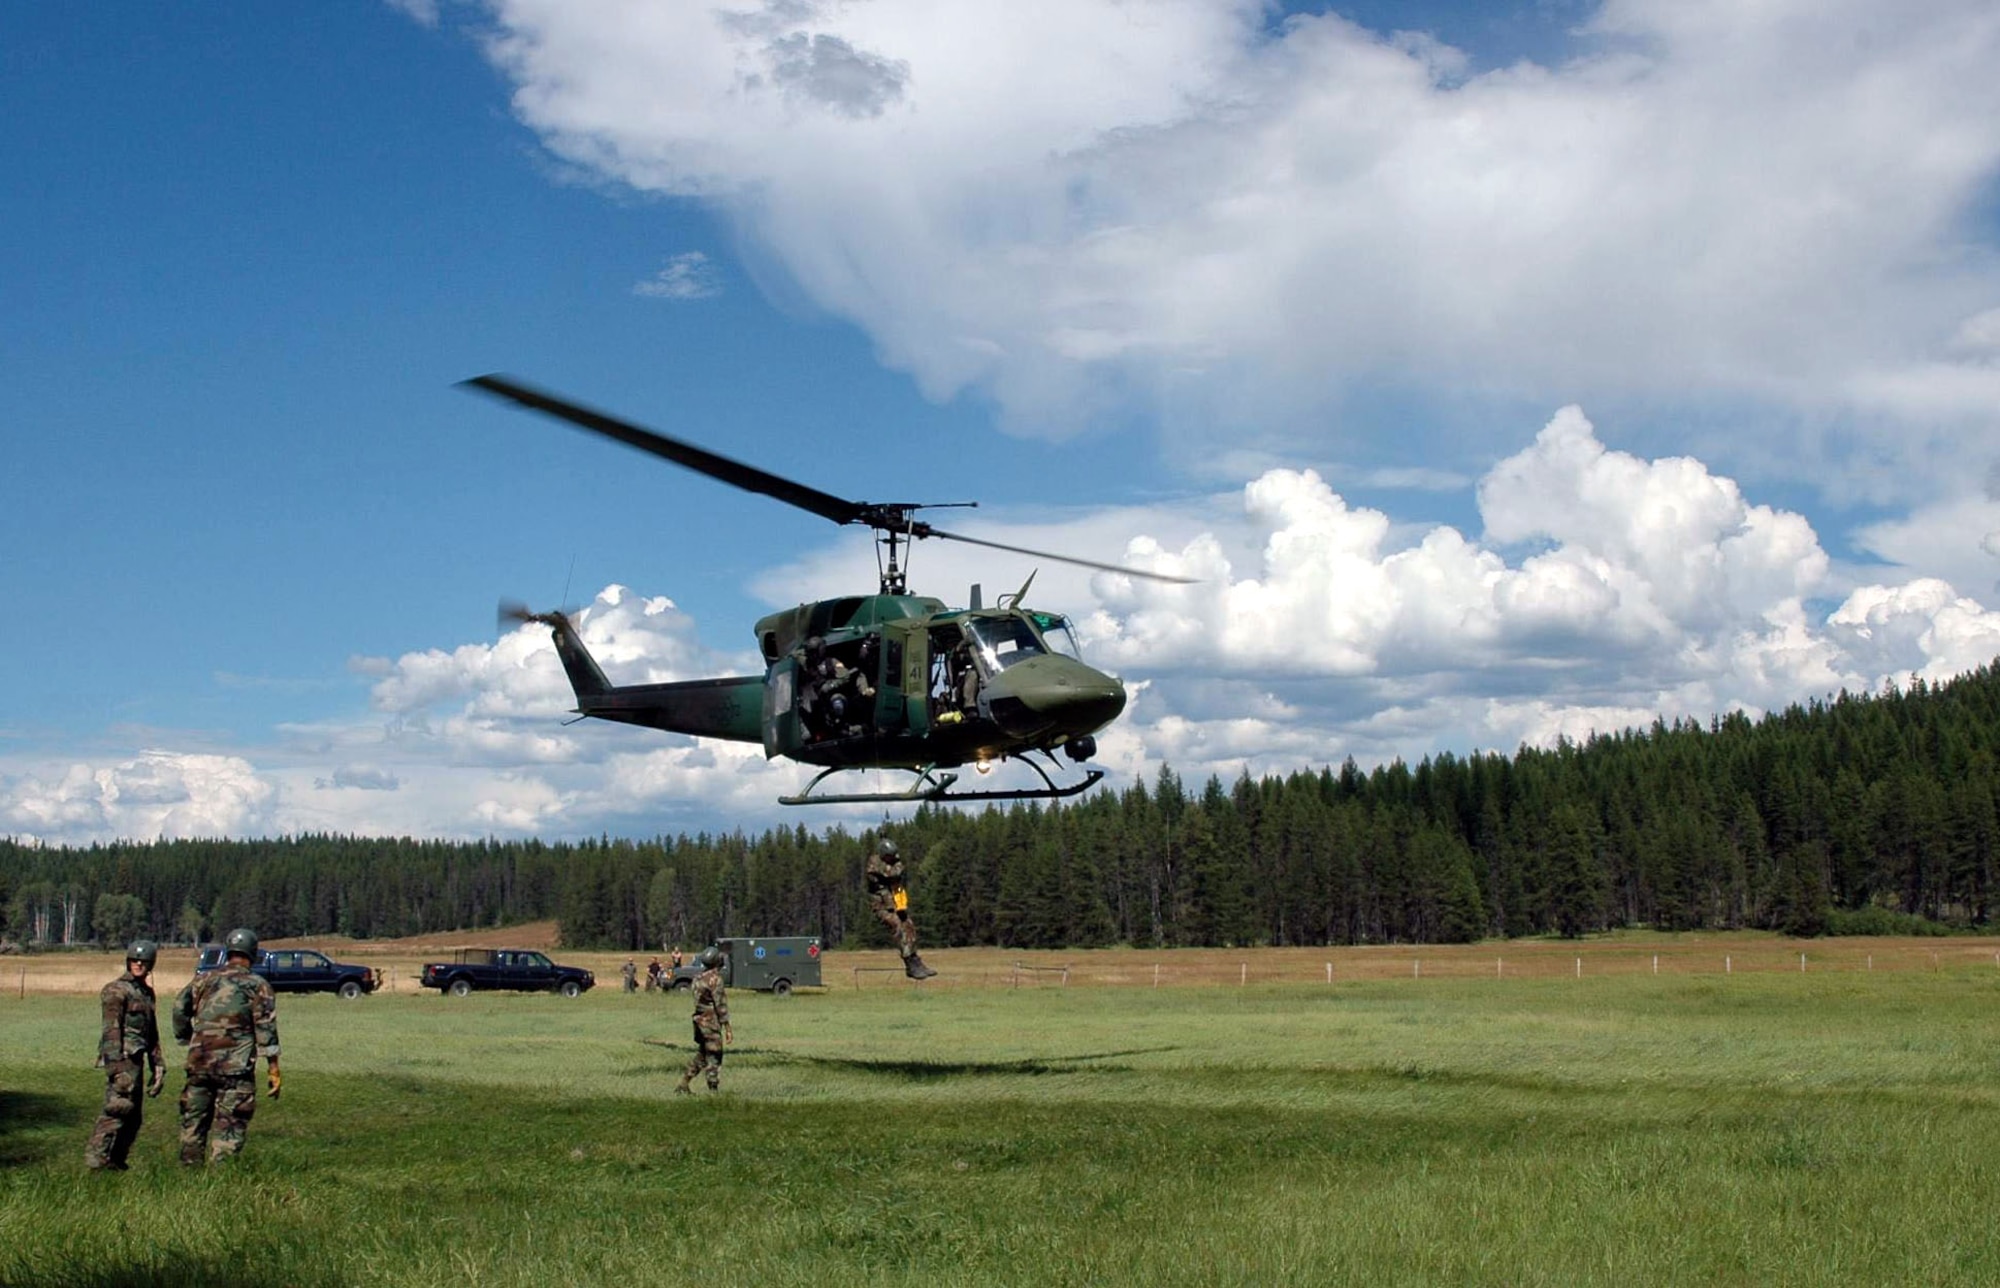 A UH-1N Huey hoists a survival, evasion, resistance and escape specialist training student at a landing zone north of Fairchild Air Force Base, Wash. The 36th Rescue Flight supports the Air Force combat survival school, survival, evasion, resistance and escape specialist training, and supports the National Search and Rescue Plan for some off-base civilian emergencies.(U.S. Air Force photo/Tech. Sgt. Michael Darvis)